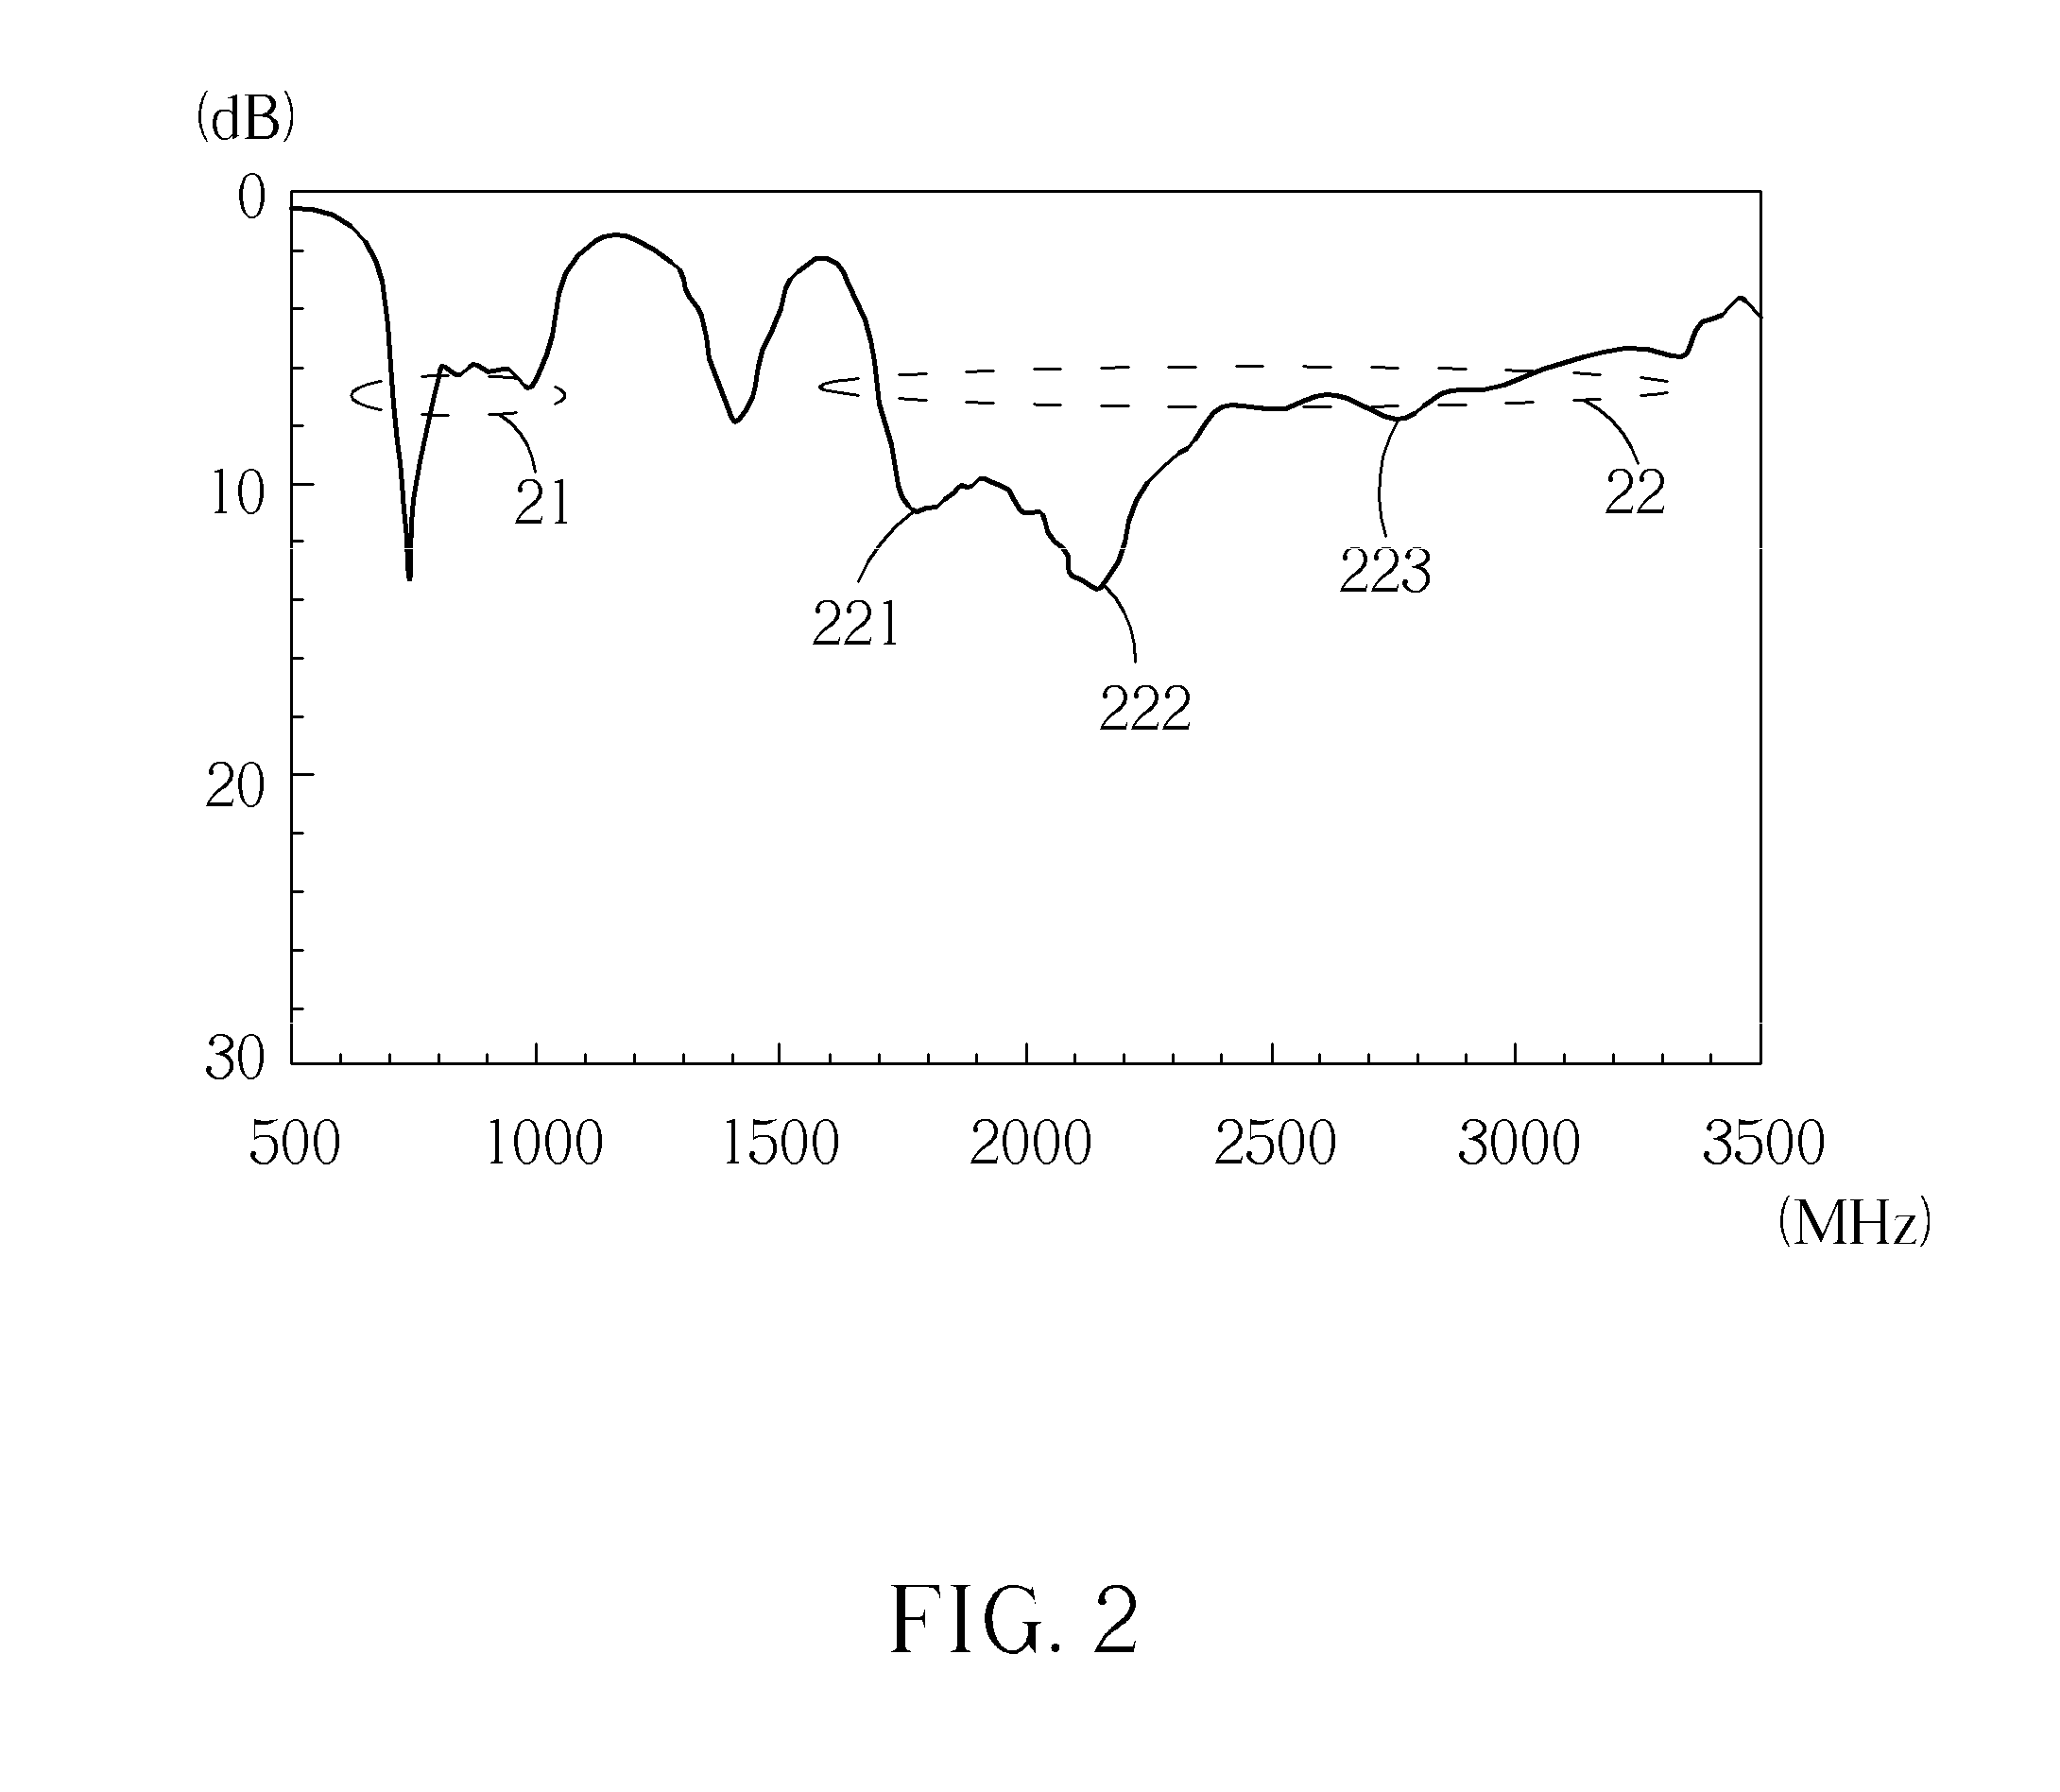 Mobile communication device and antenna structure therein